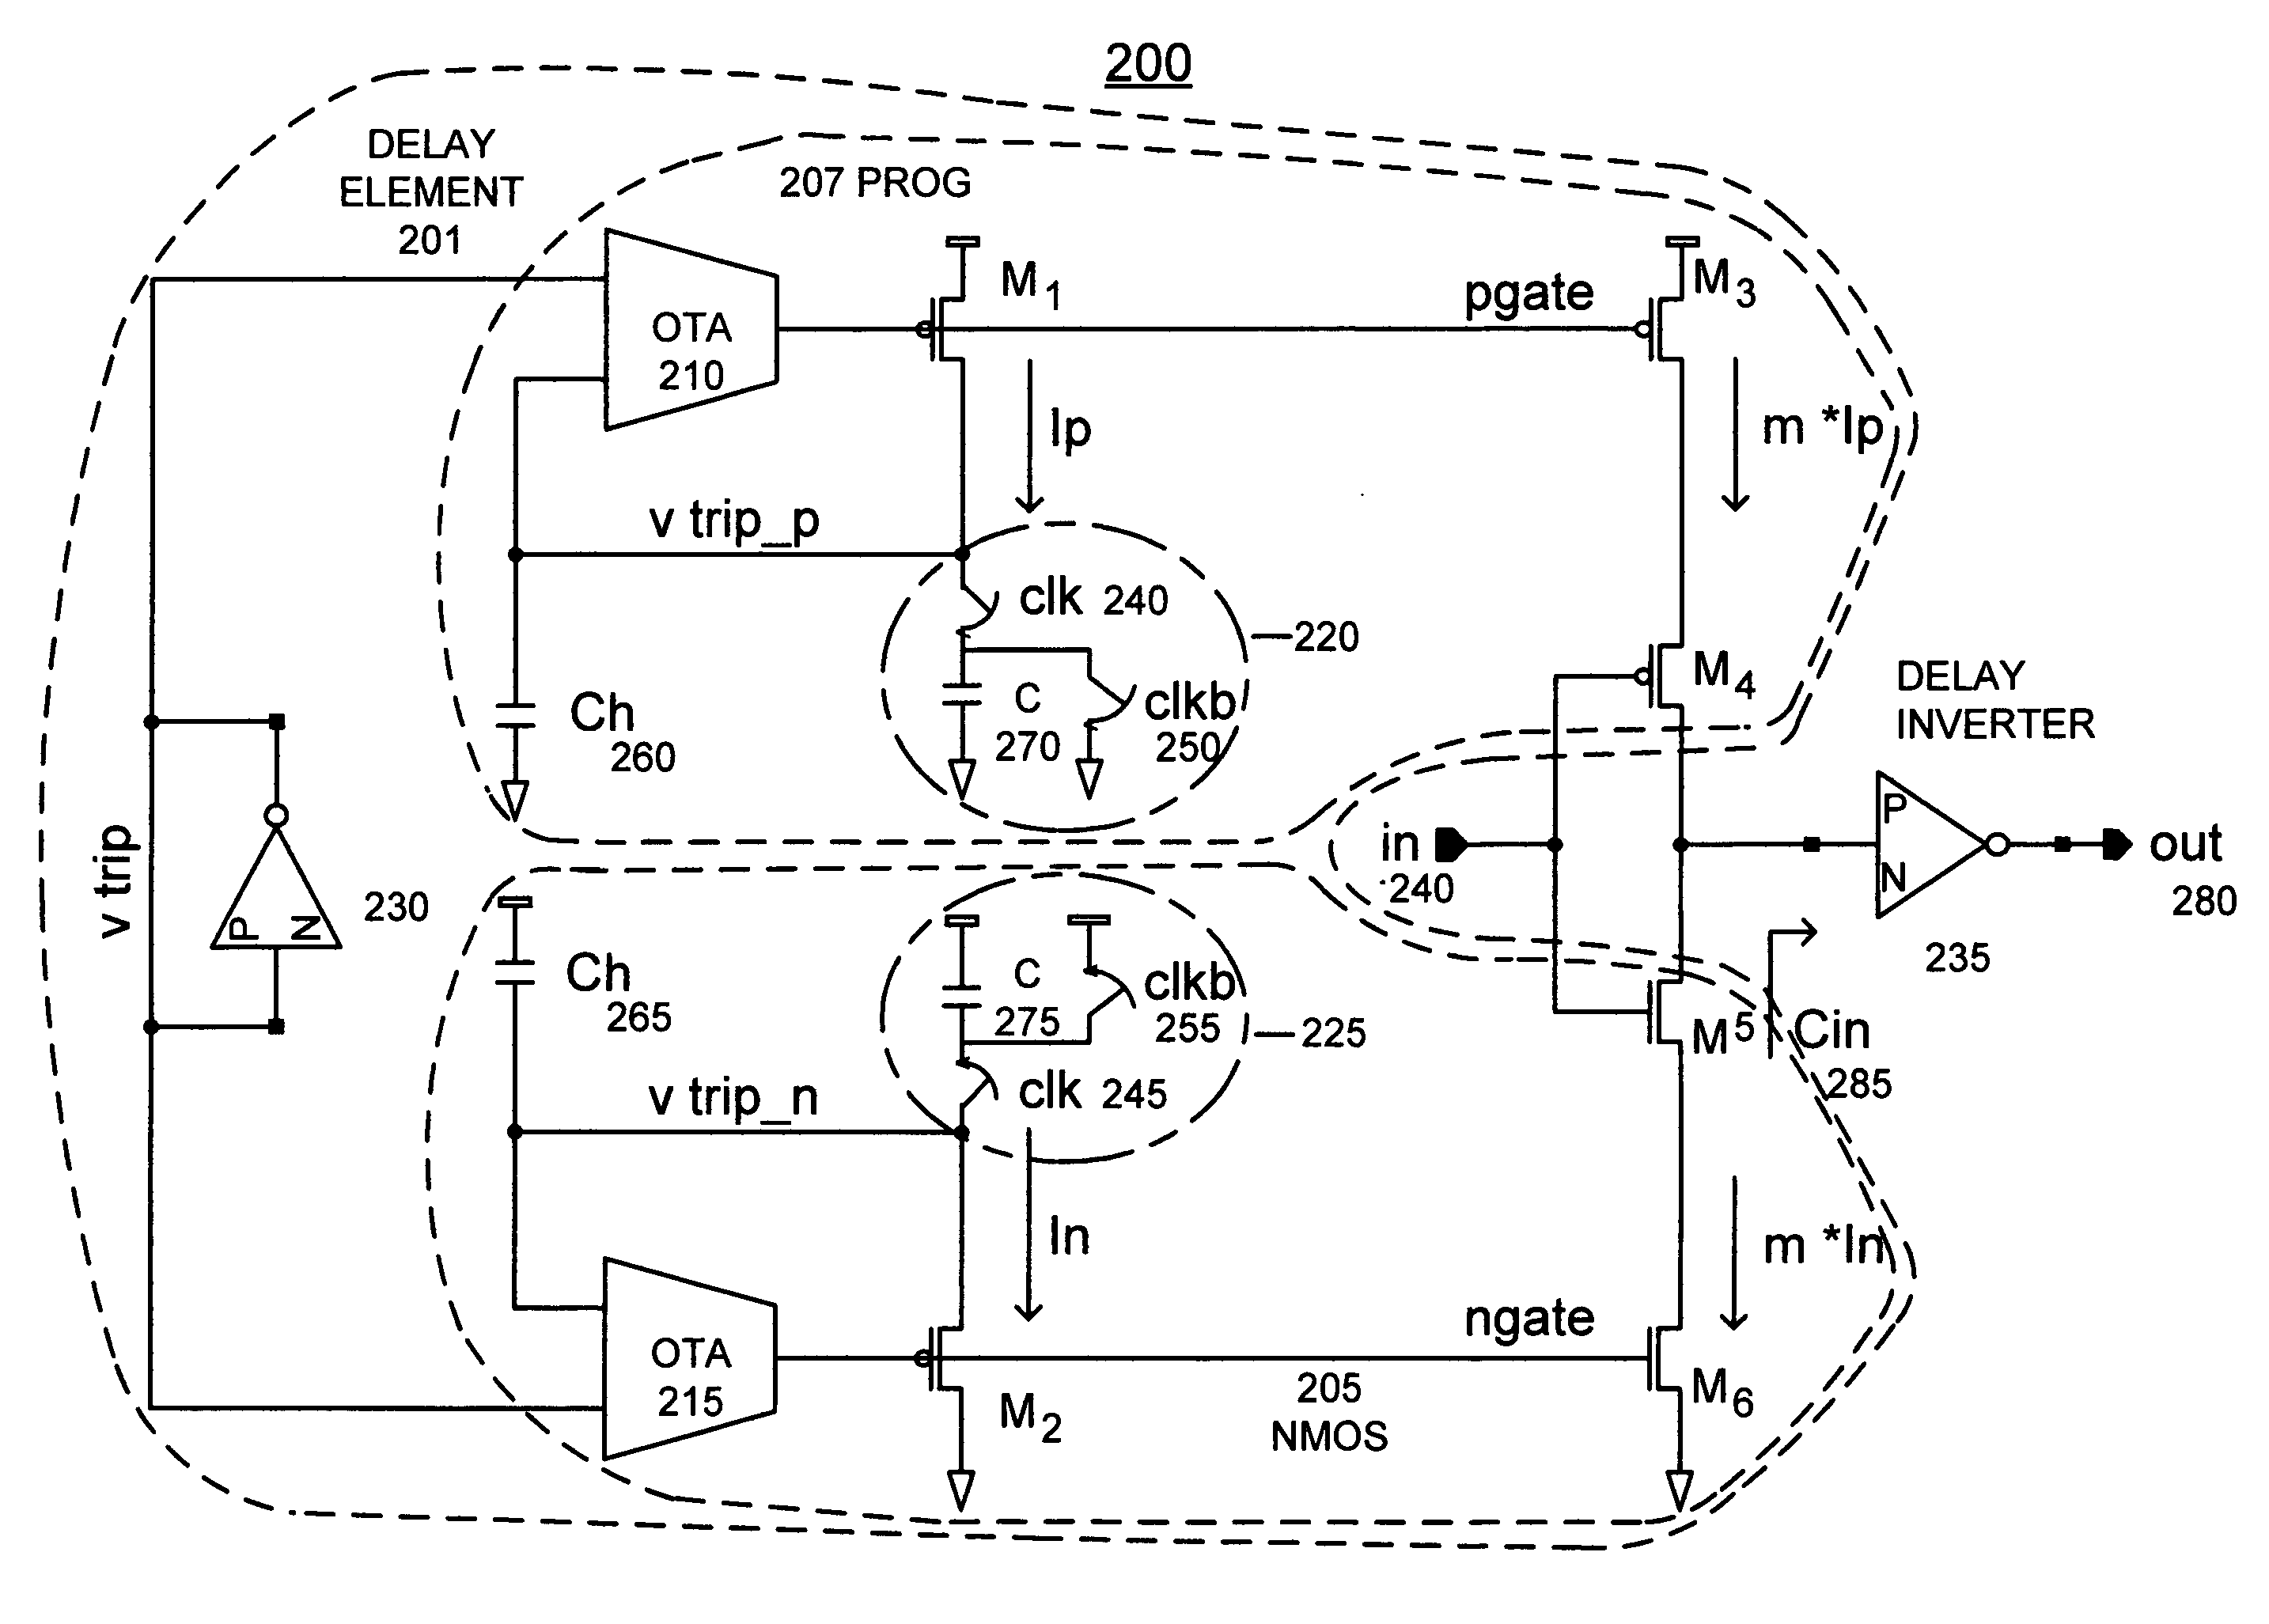 Delay circuit that scales with clock cycle time